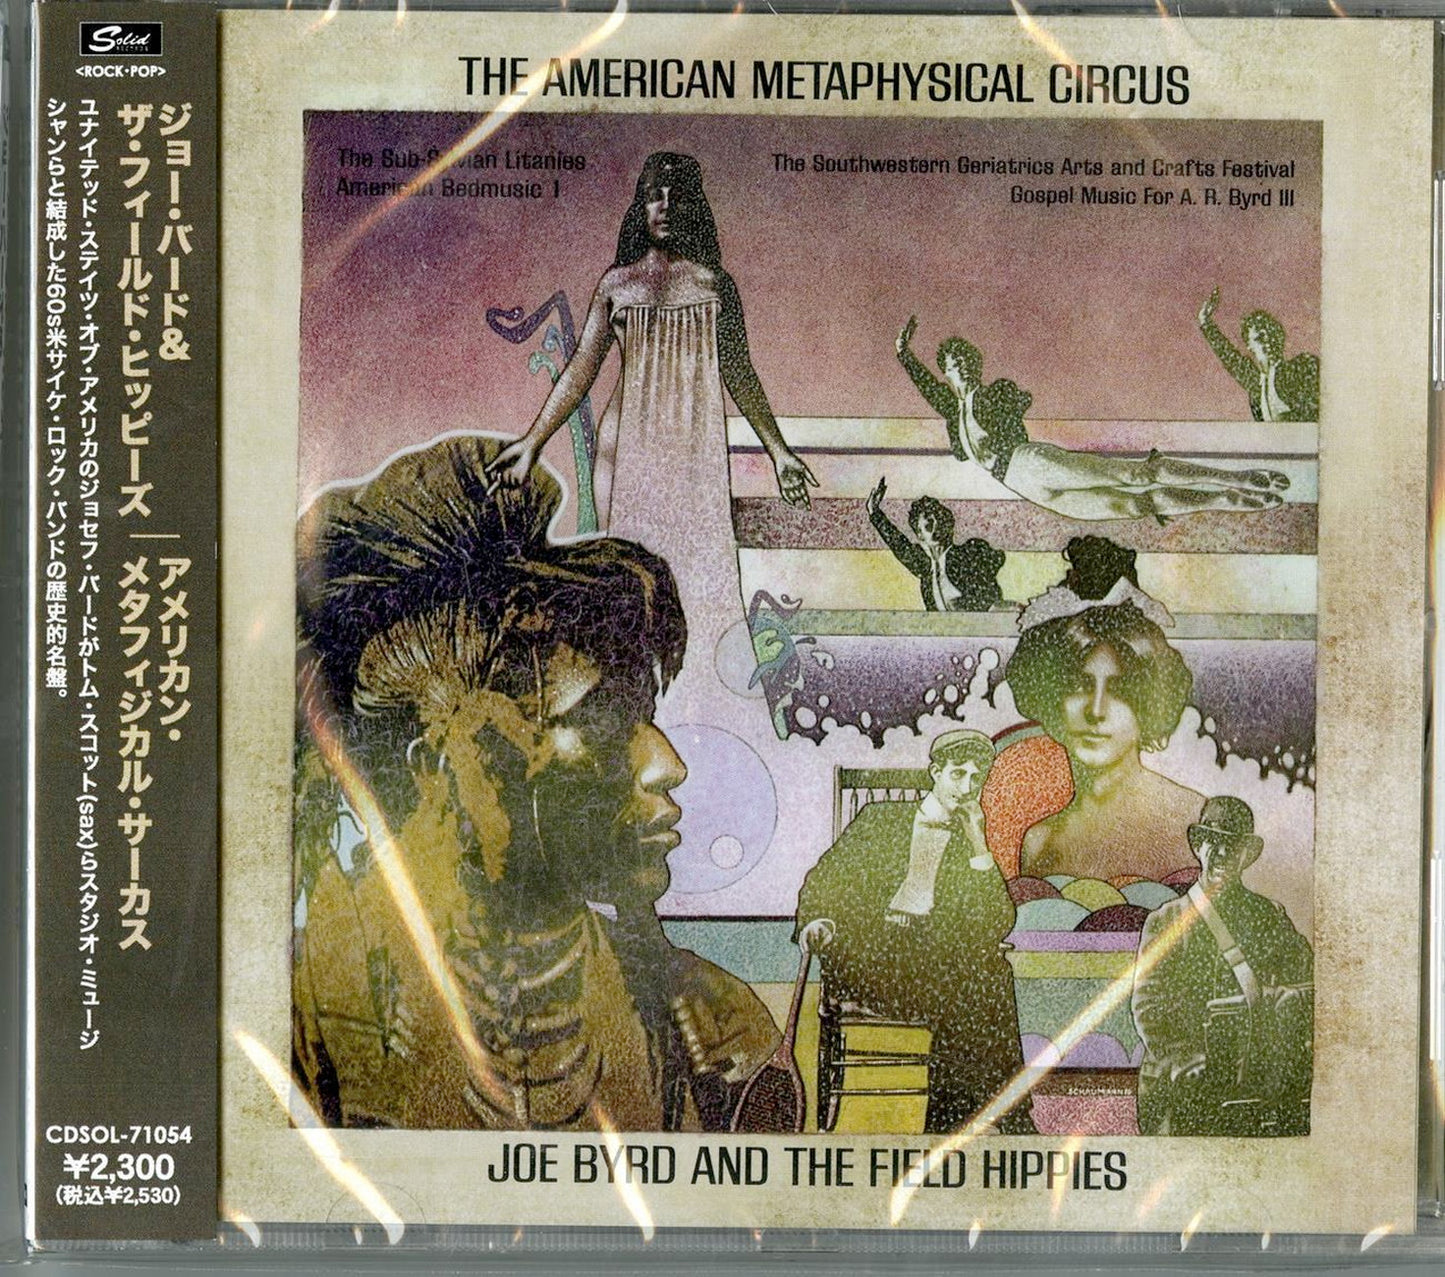 Joe Byrd And The Field Hippies - The American Metaphysical Circus - Import CD